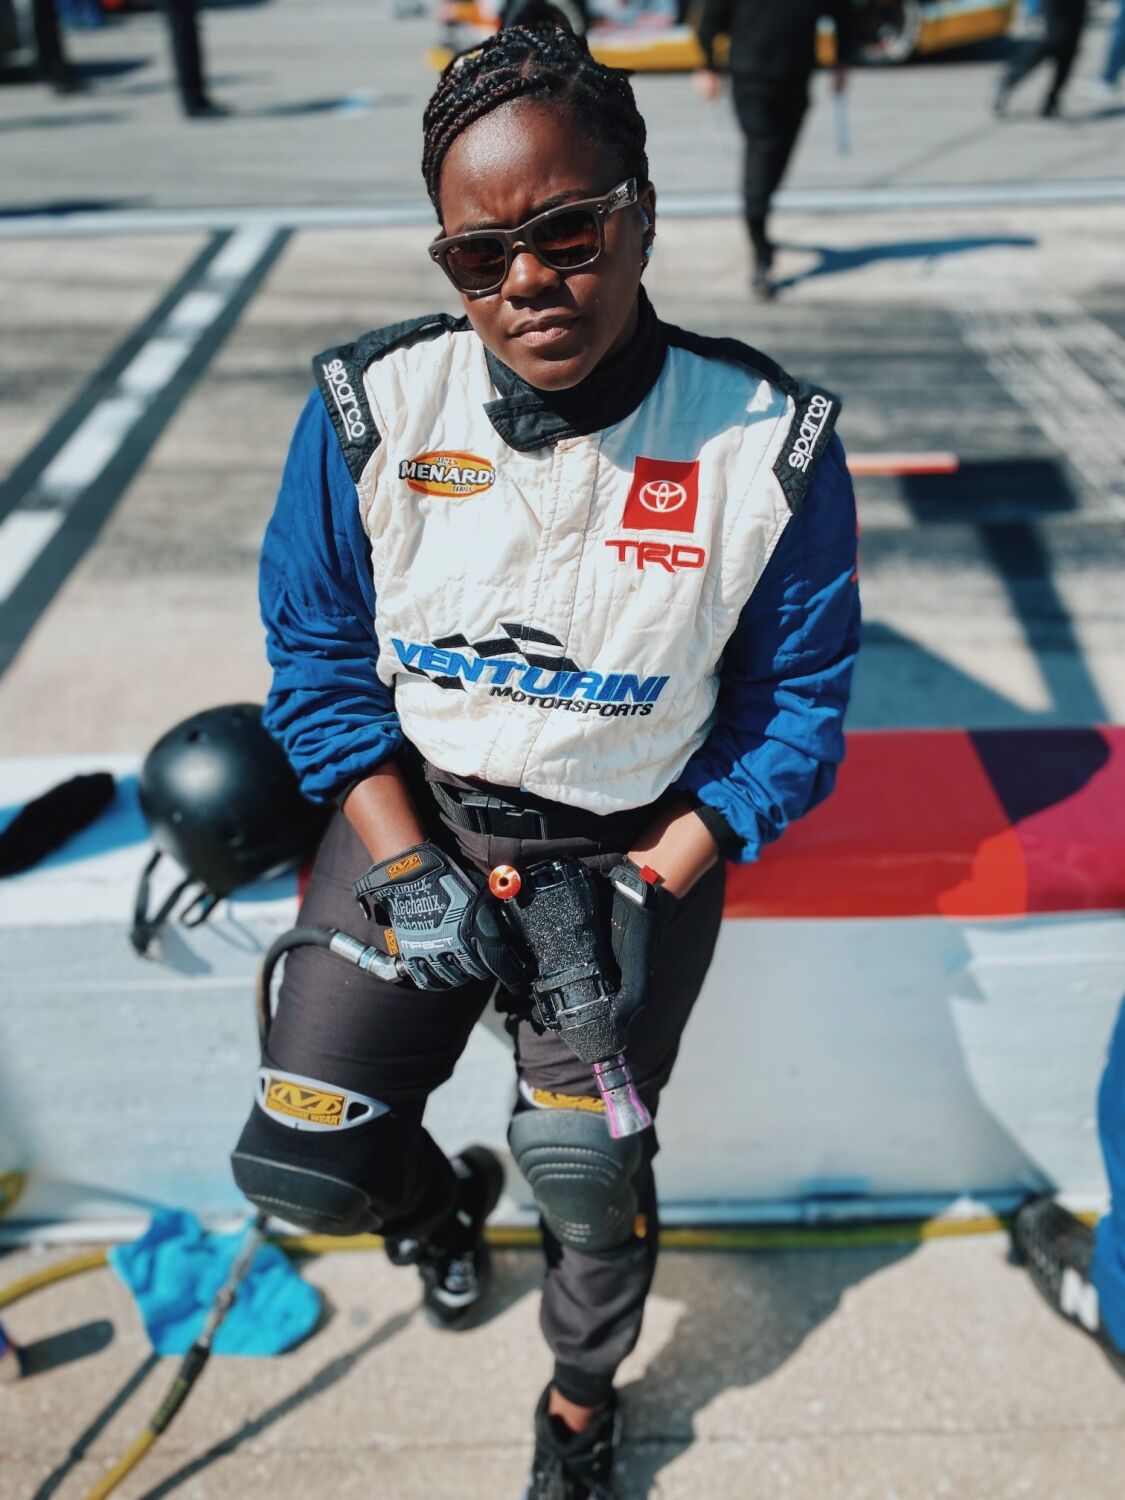 NASCAR's Drive for Diversity is transforming pit crews with college and pro athletes